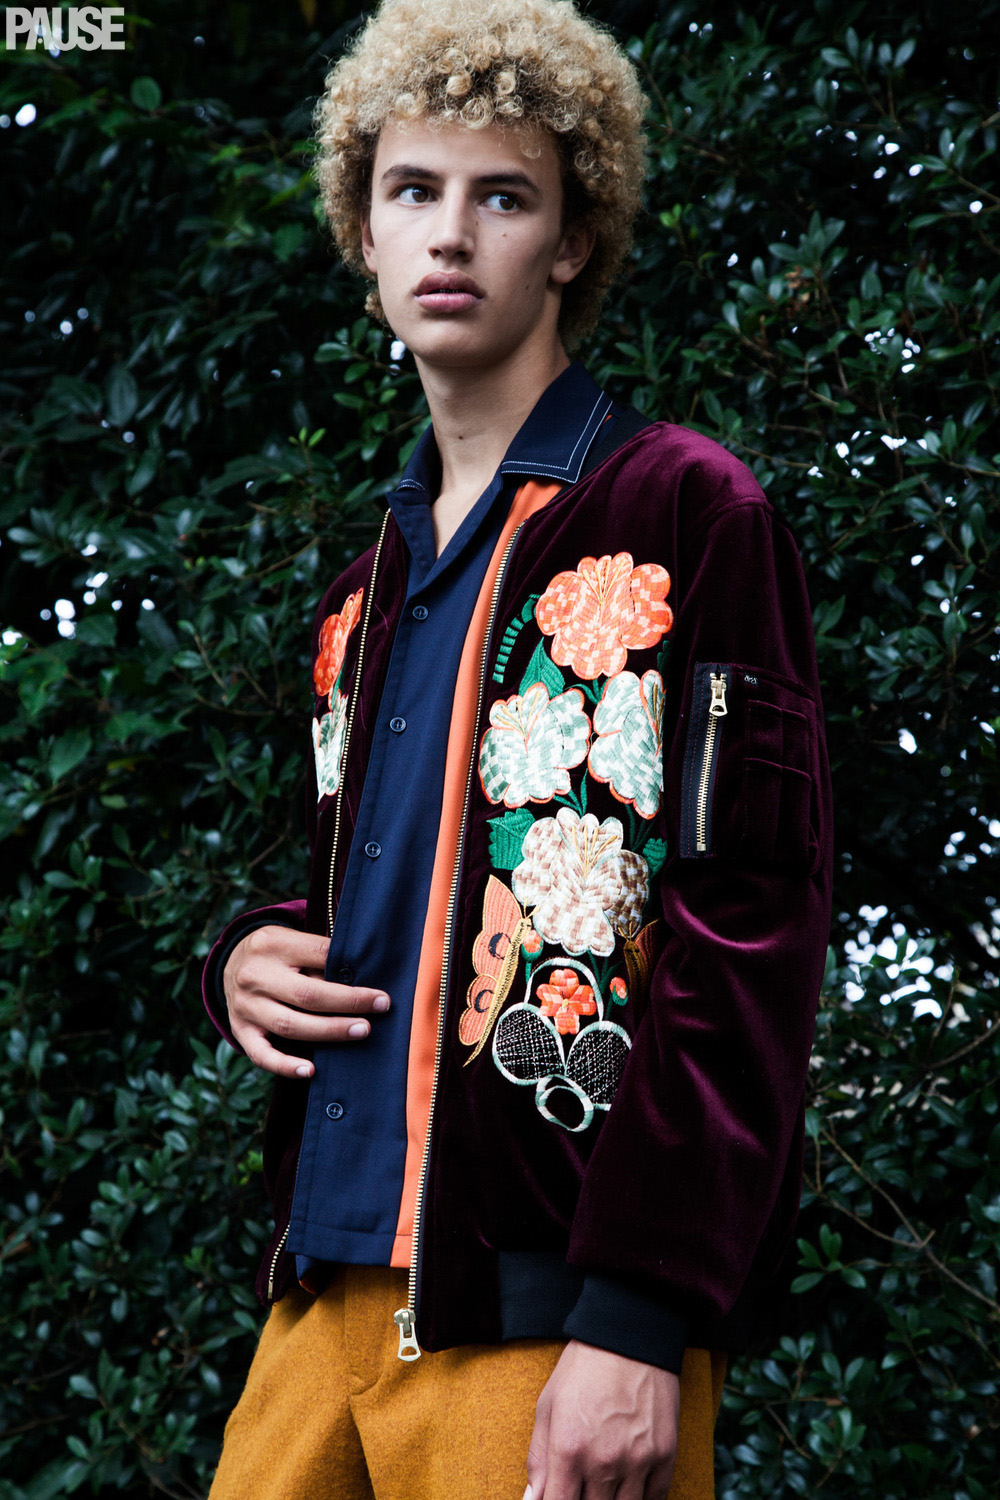 PAUSE Editorial: Outsiders – PAUSE Online | Men's Fashion, Street Style ...